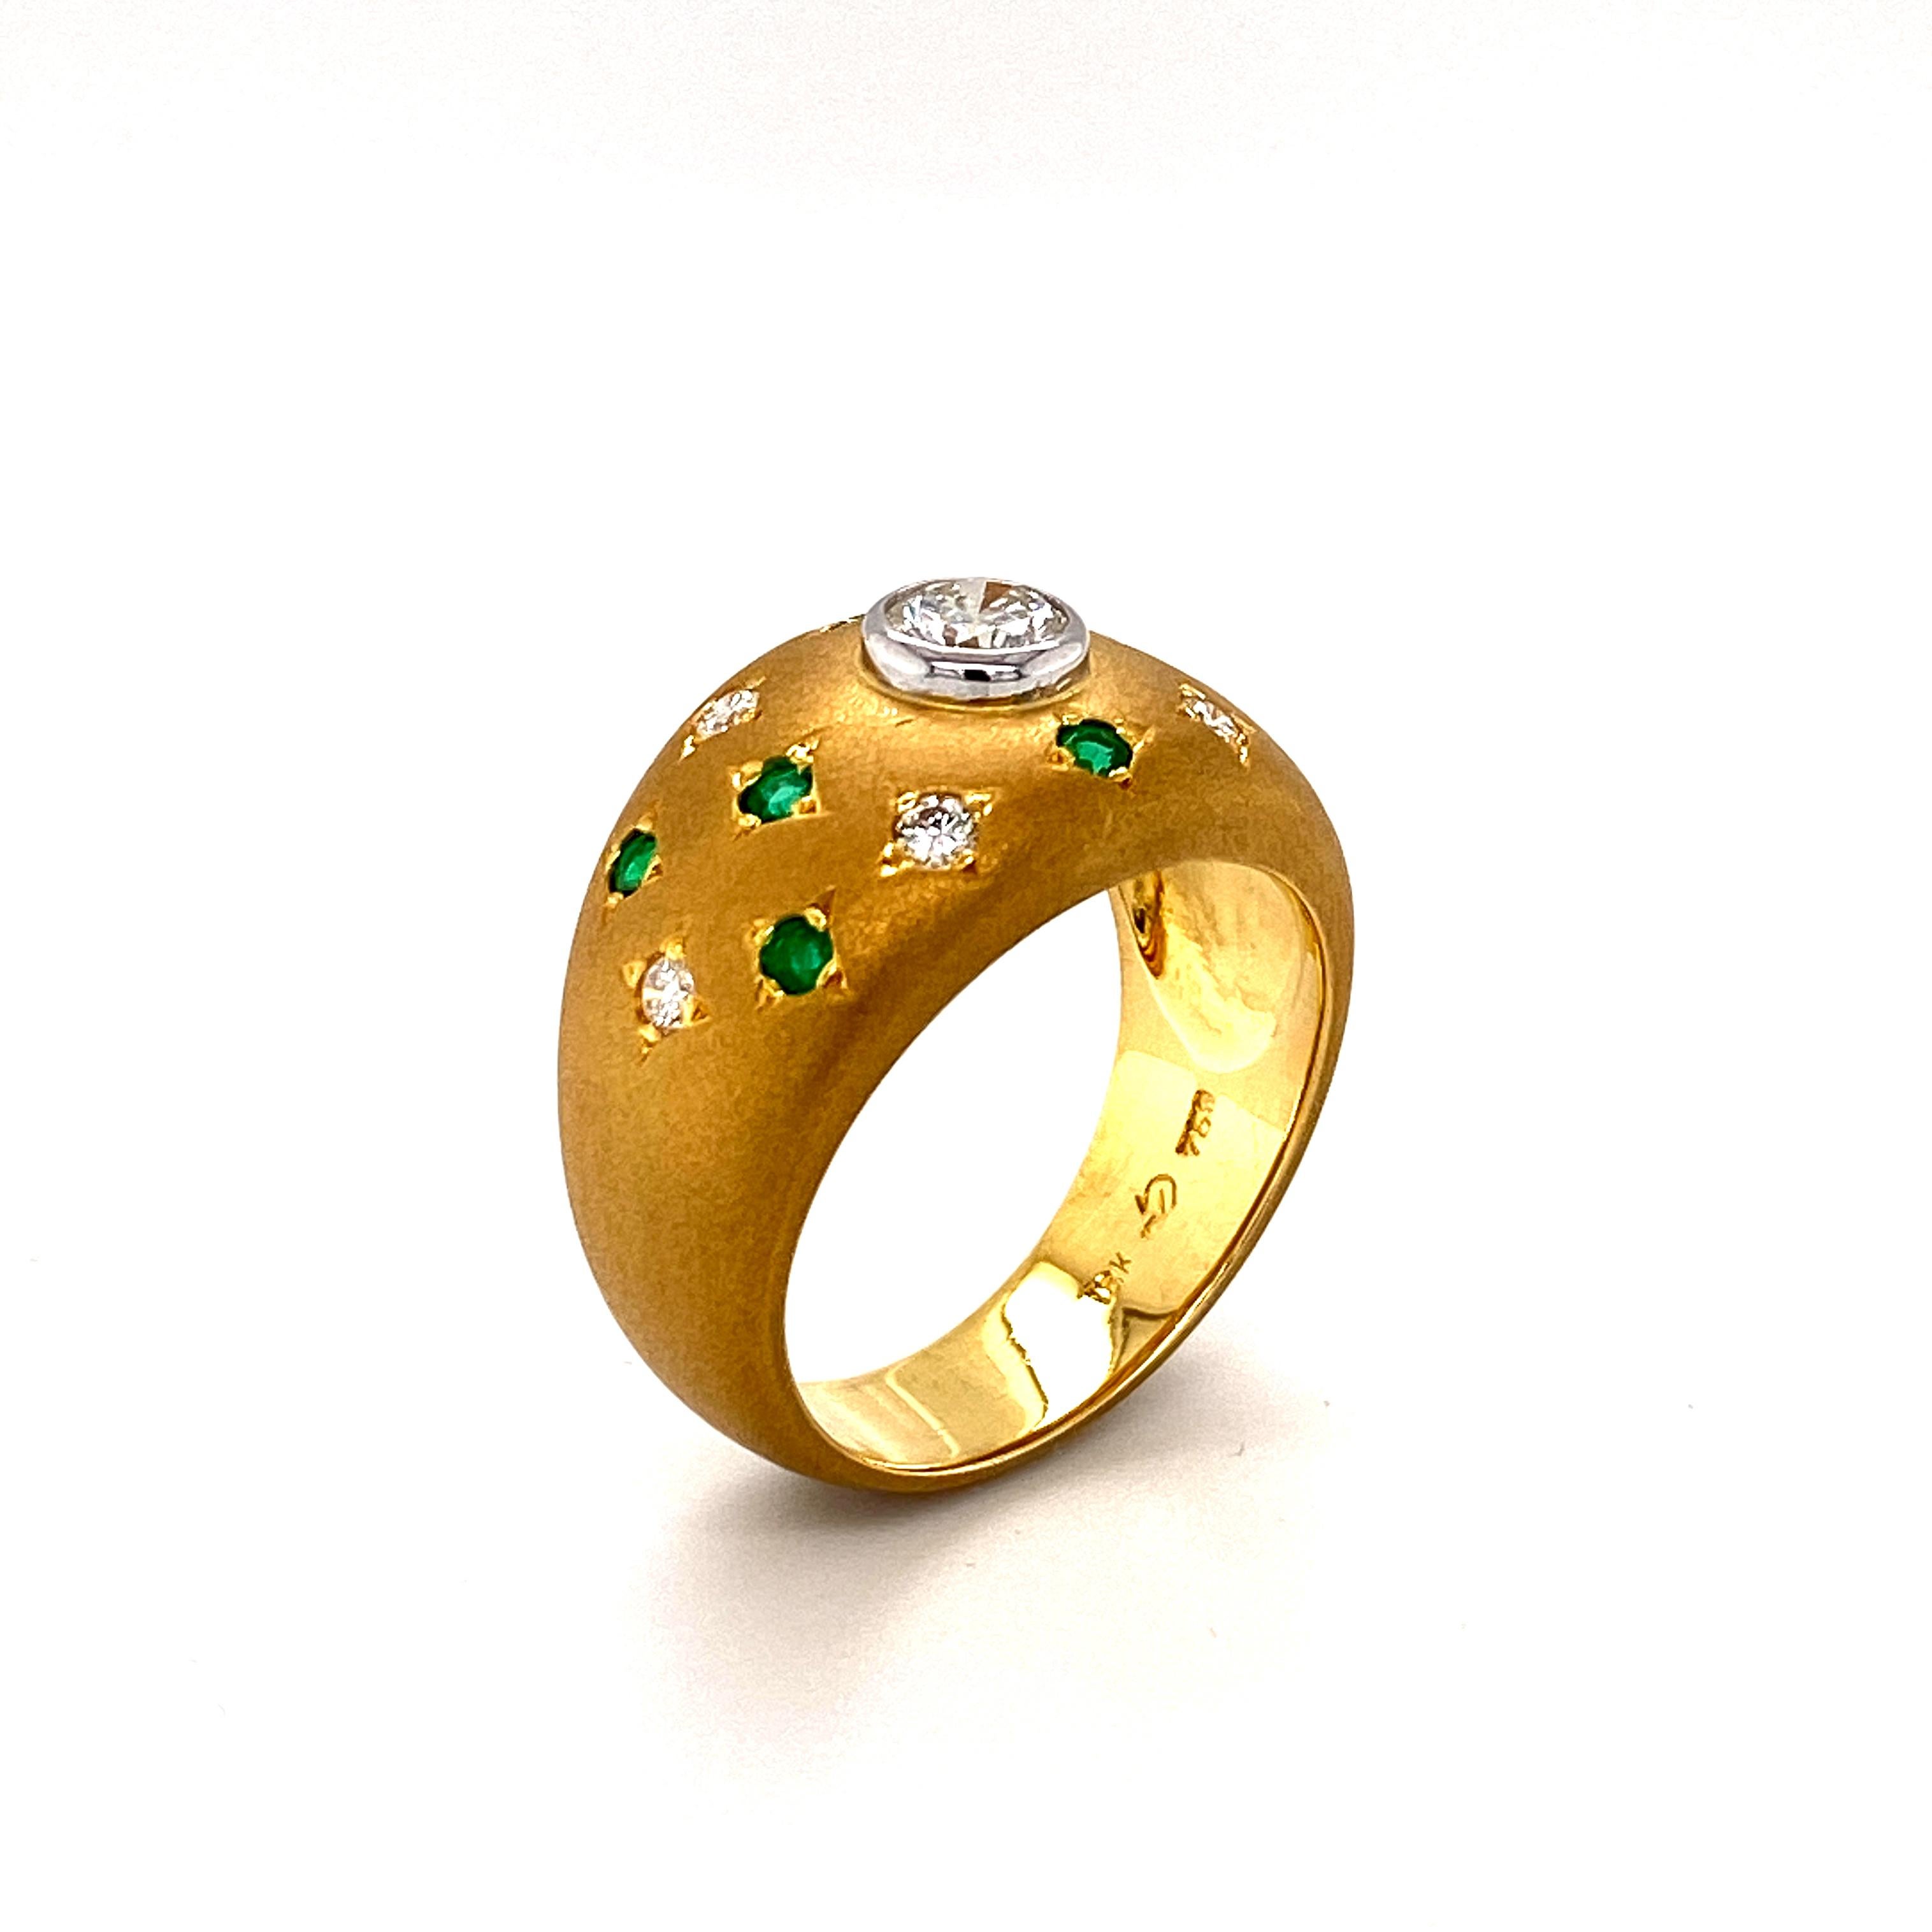 Women's or Men's Starry Diamond and Emerald Band Ring in 18 Karat Gold with Vintage Matte Finish